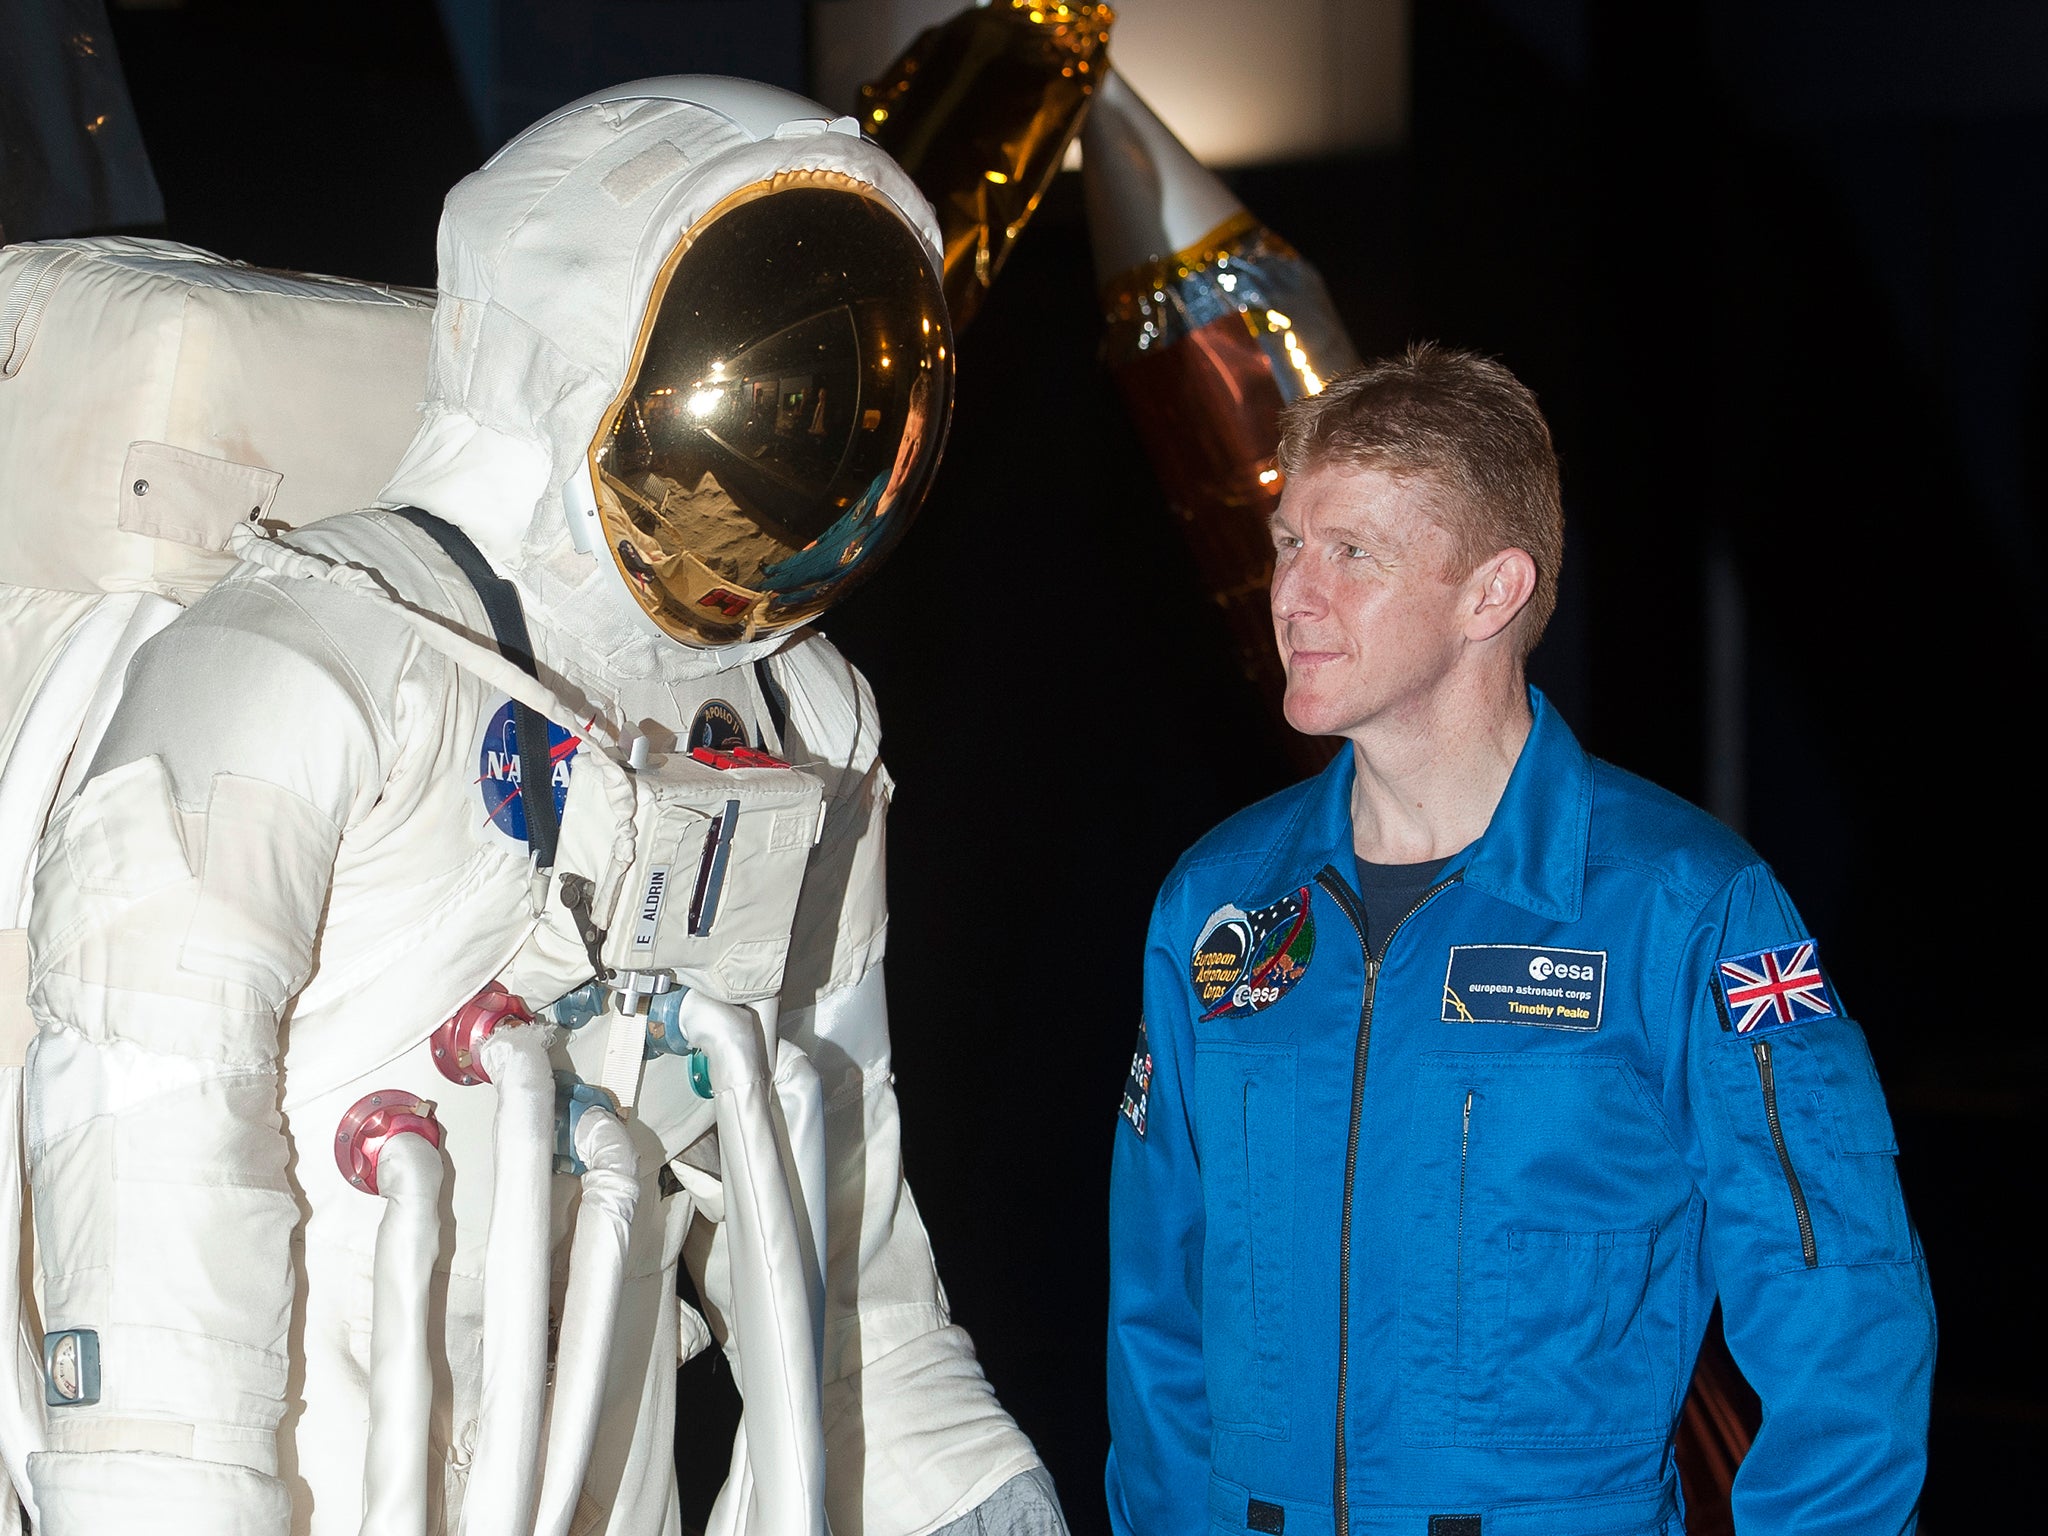 Major Peake follows Helen Sharman as the only full British citizen to experience space first hand